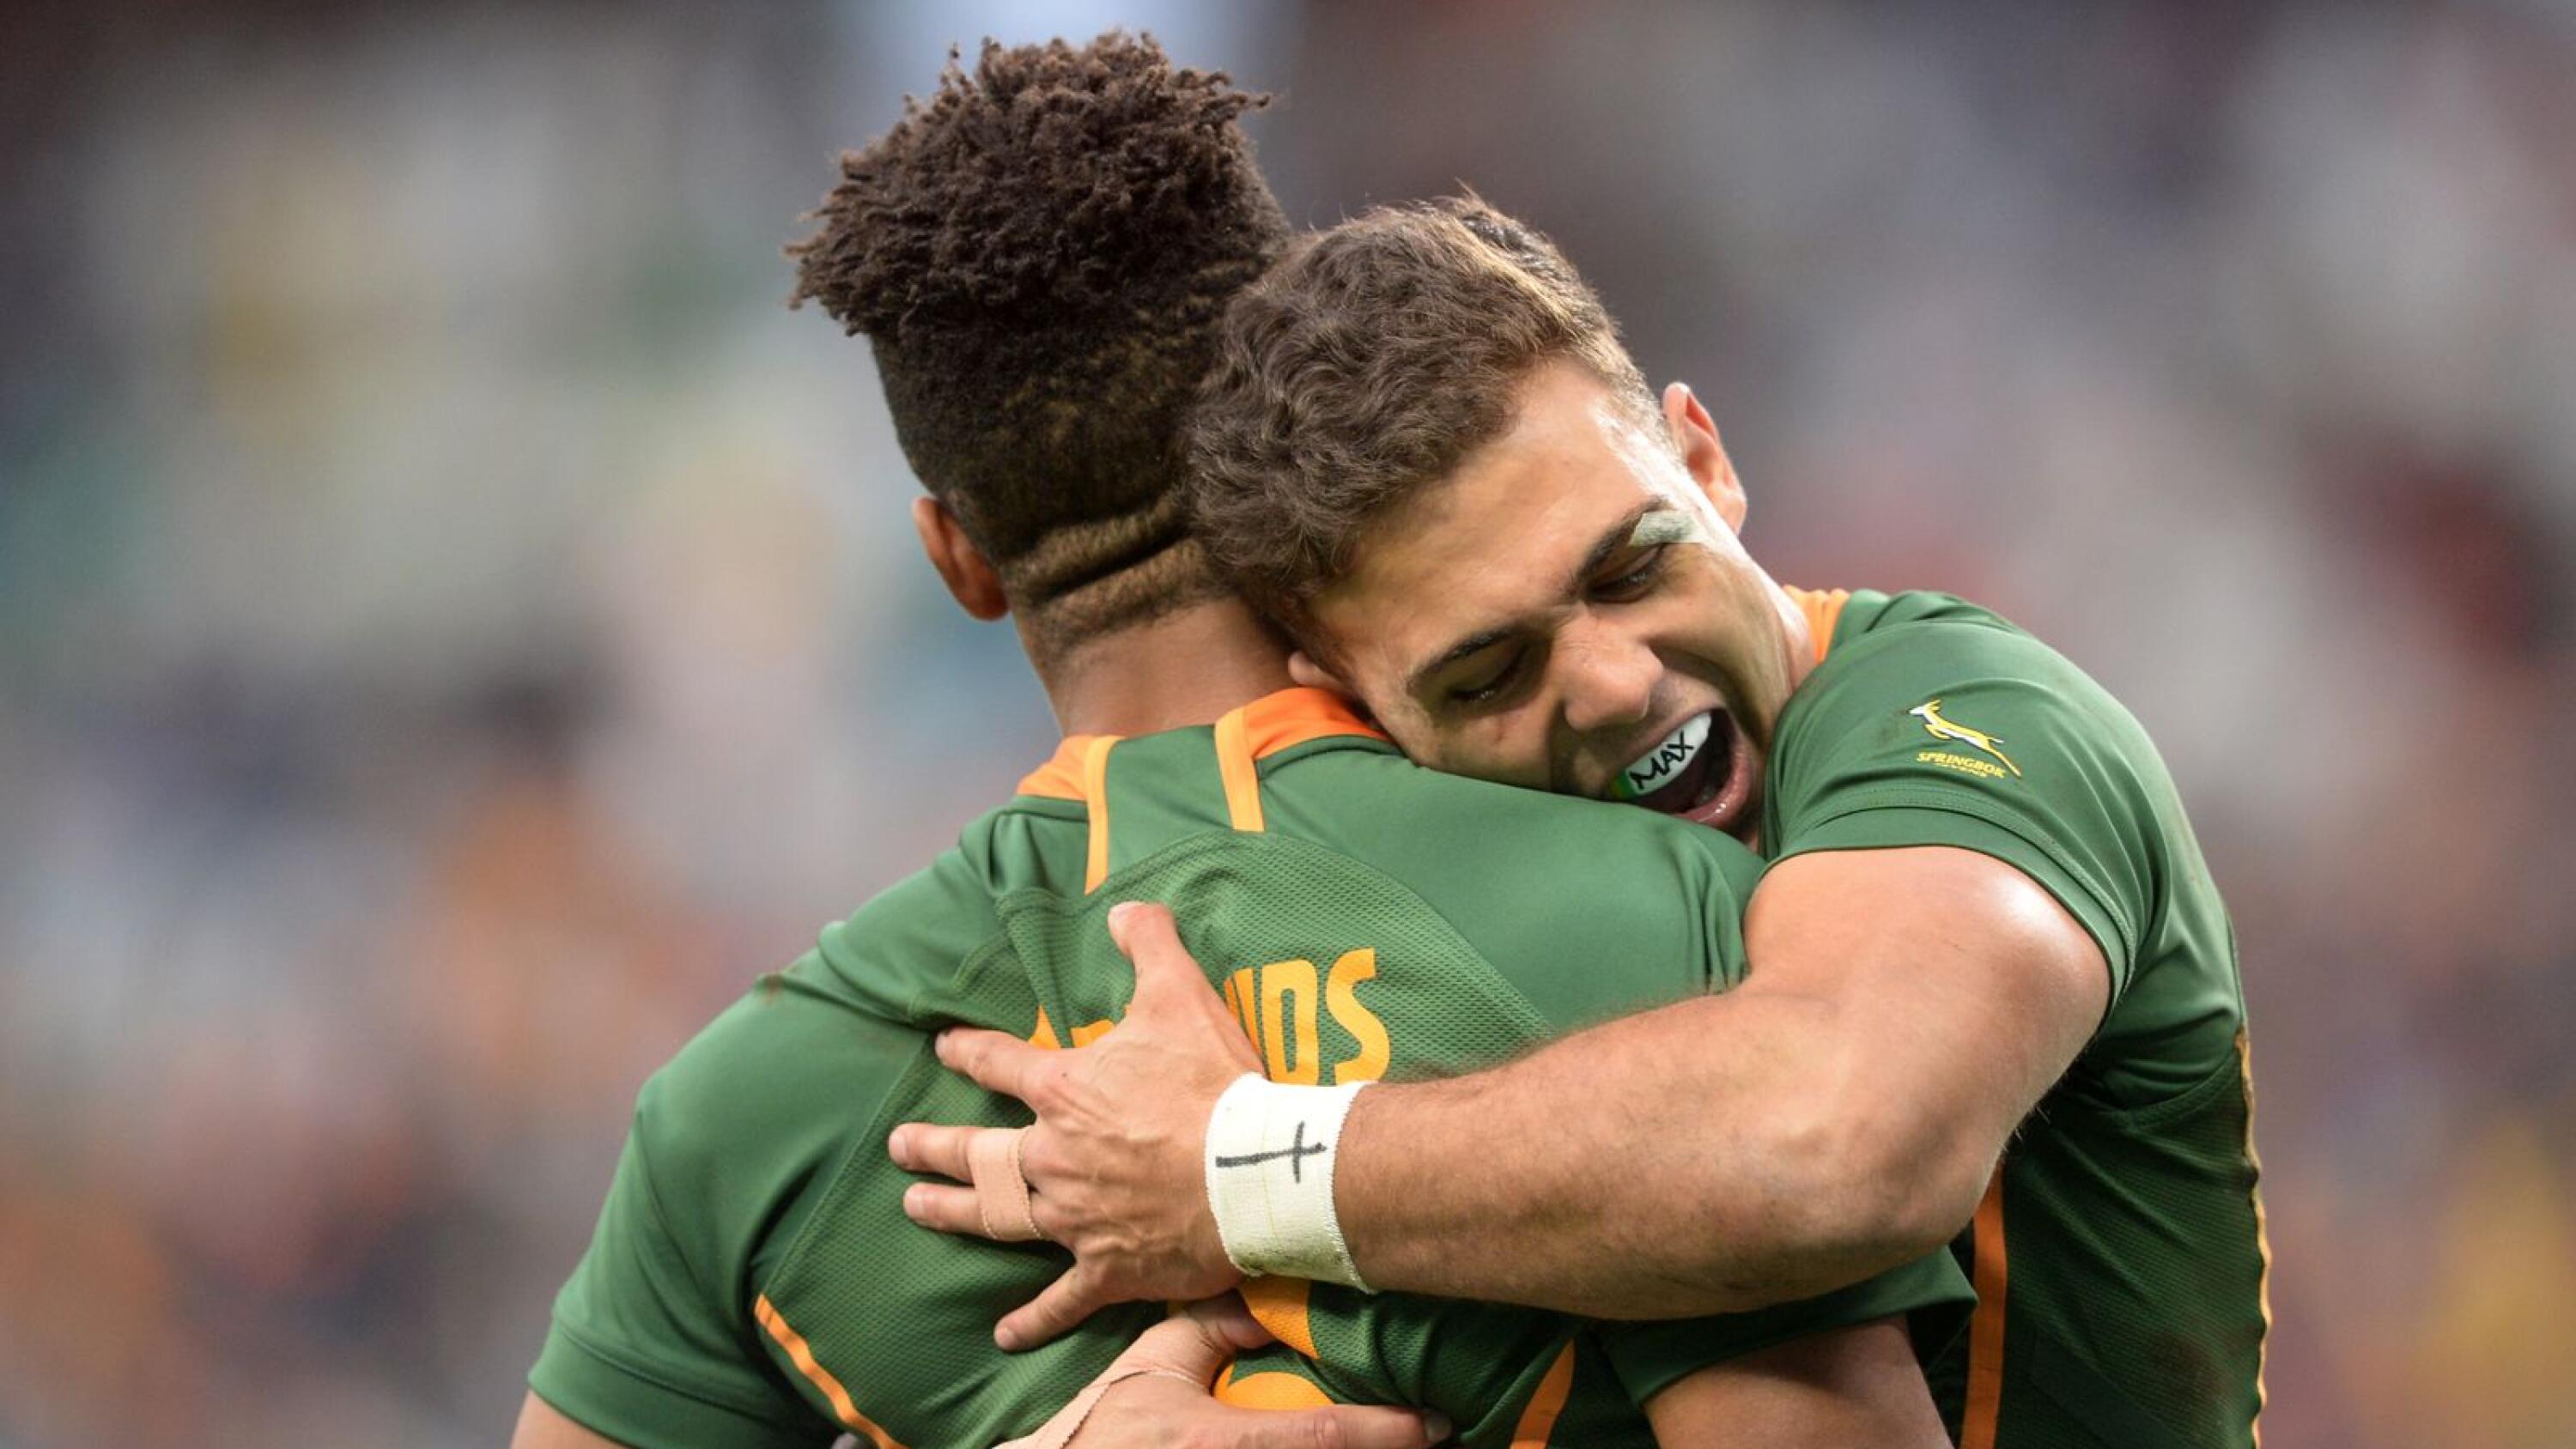 Muller du Plessis of South Africa celebrates with try scorer Angelo Davids during day three of the Rugby World Cup Sevens tournament at Cape Town Stadium on Sunday